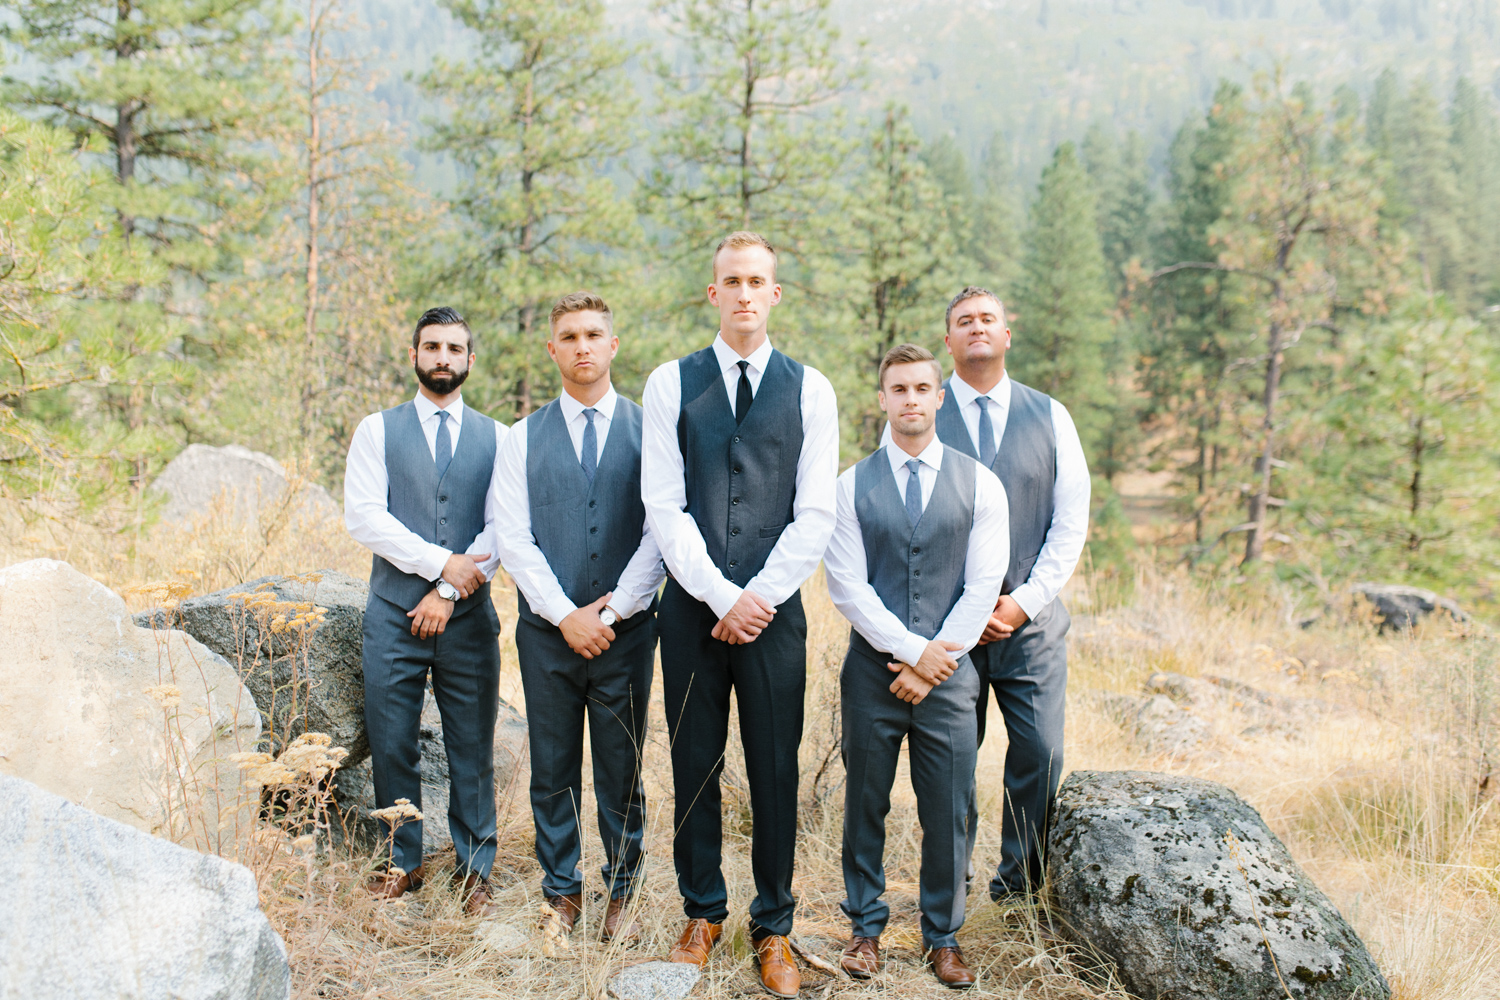 Grey and White Wedding in the Mountains of Leavenworth, Washington | Sleeping Lady | Classic and Timeless Wedding | VSCO | Bridal Party Portraits on a Mountain.jpg-2746.jpg